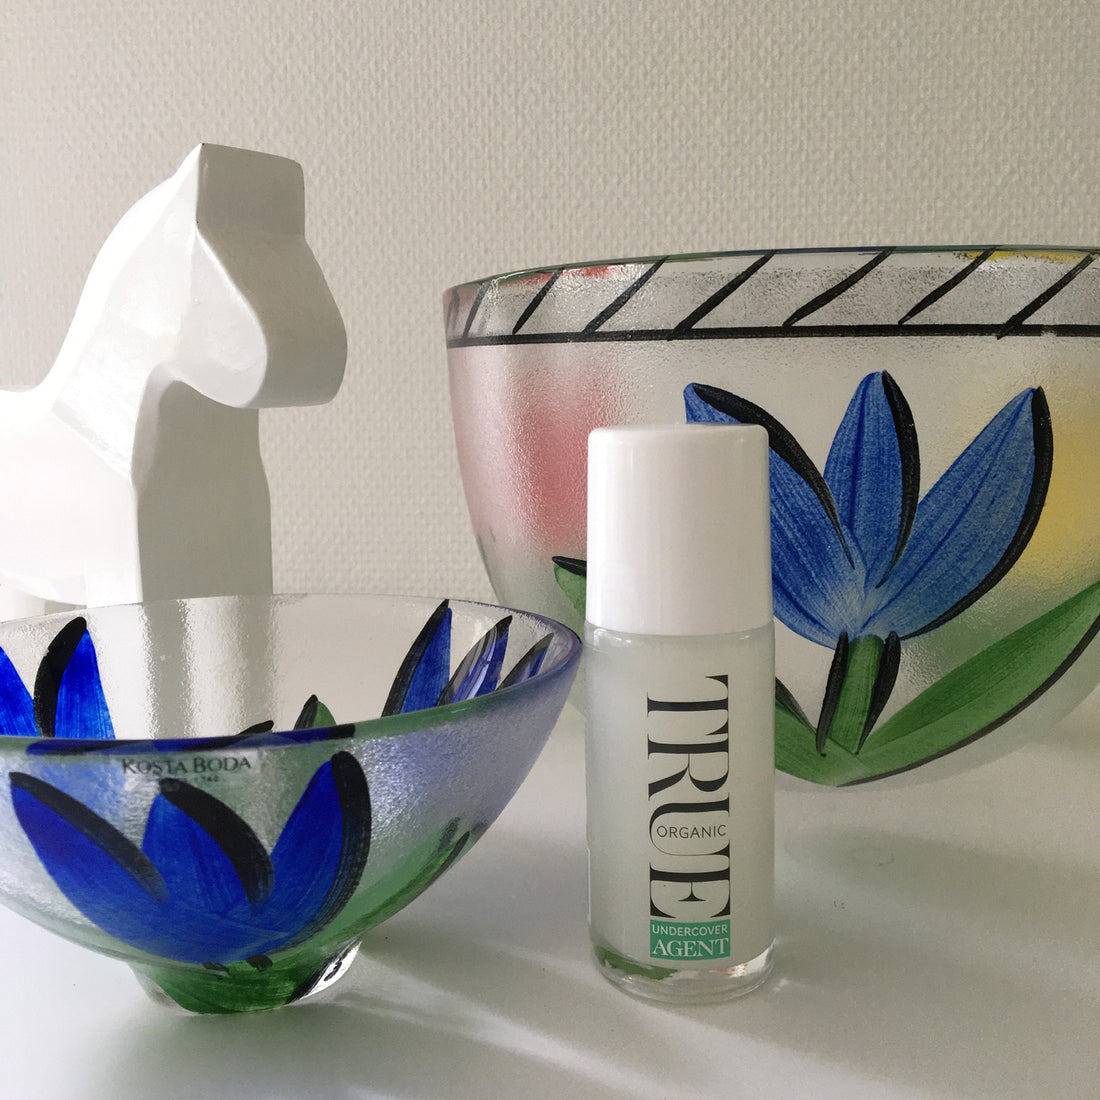 Swedish and Scandinavian design in skincare products